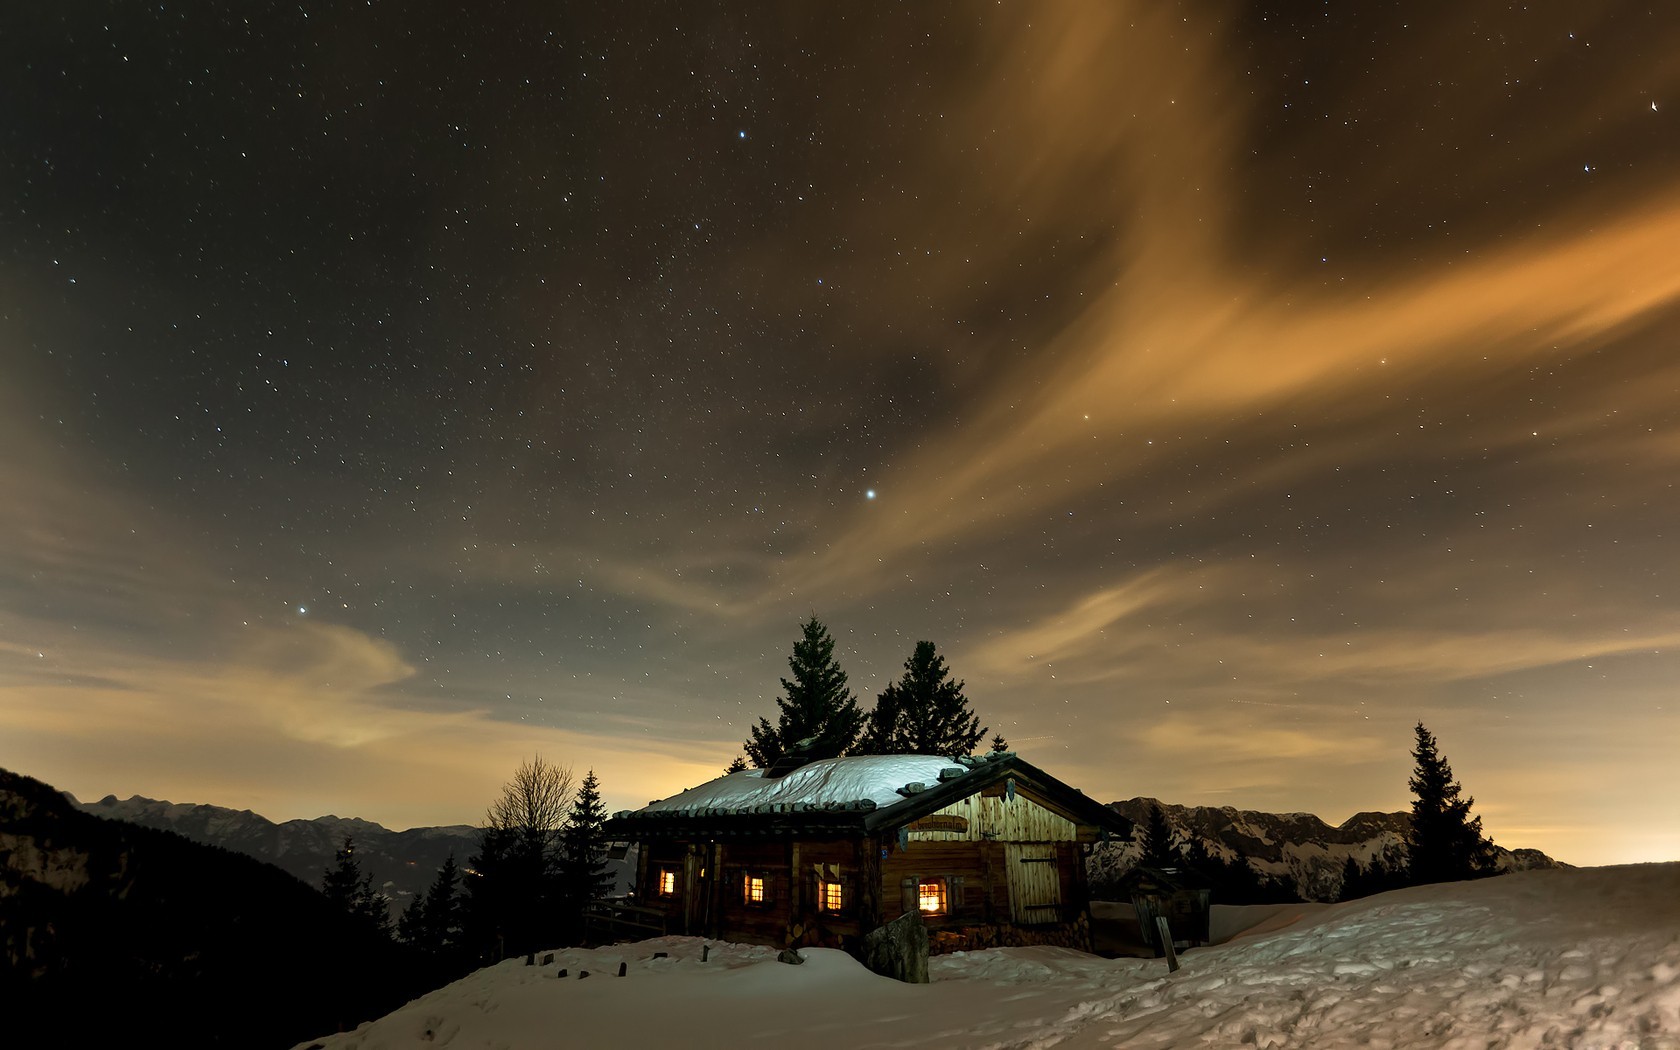 General 1680x1050 house sky snow hut winter stars cold outdoors nature